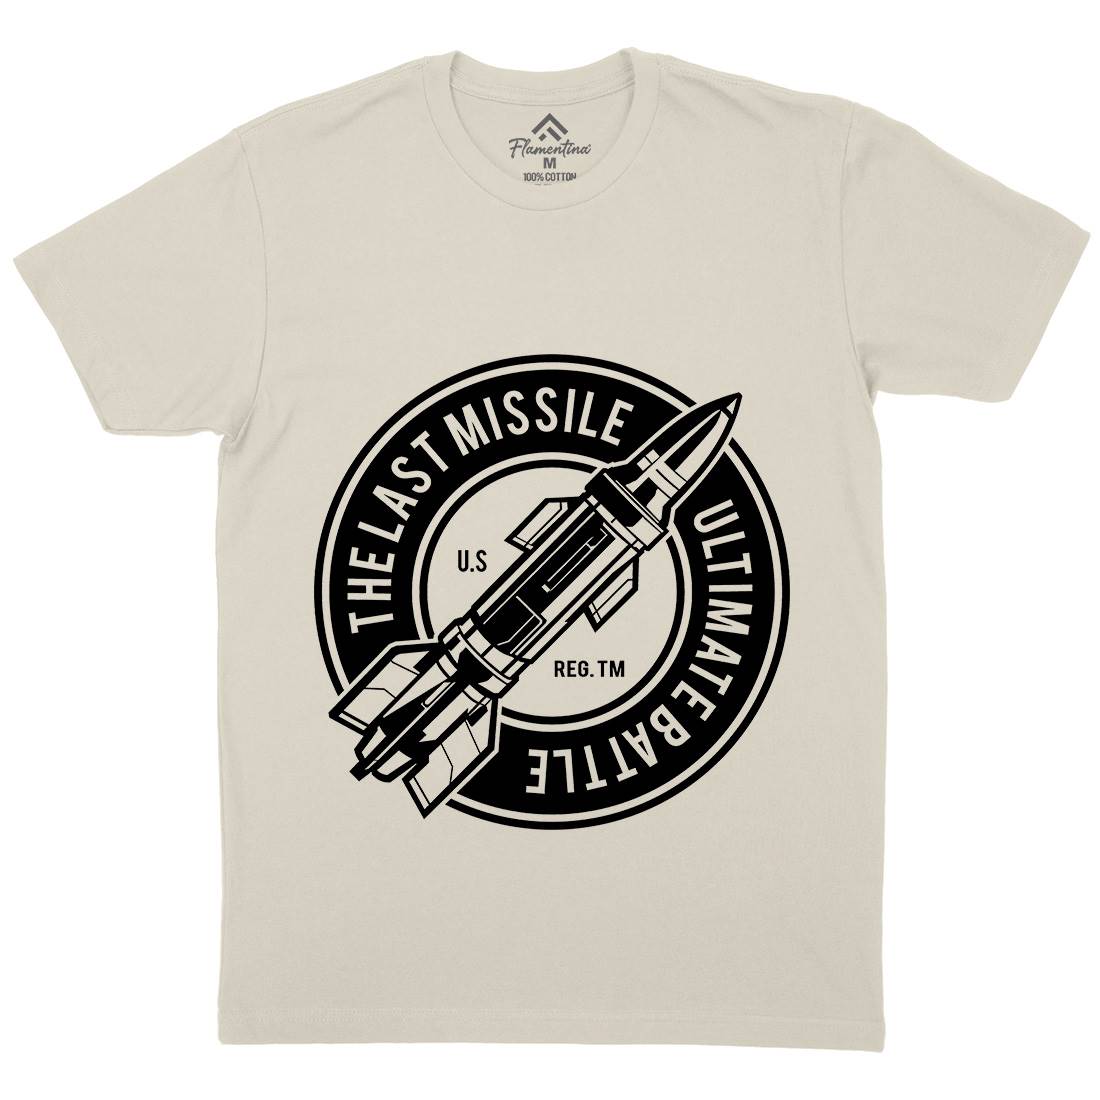 Last Missile Mens Organic Crew Neck T-Shirt Army A175